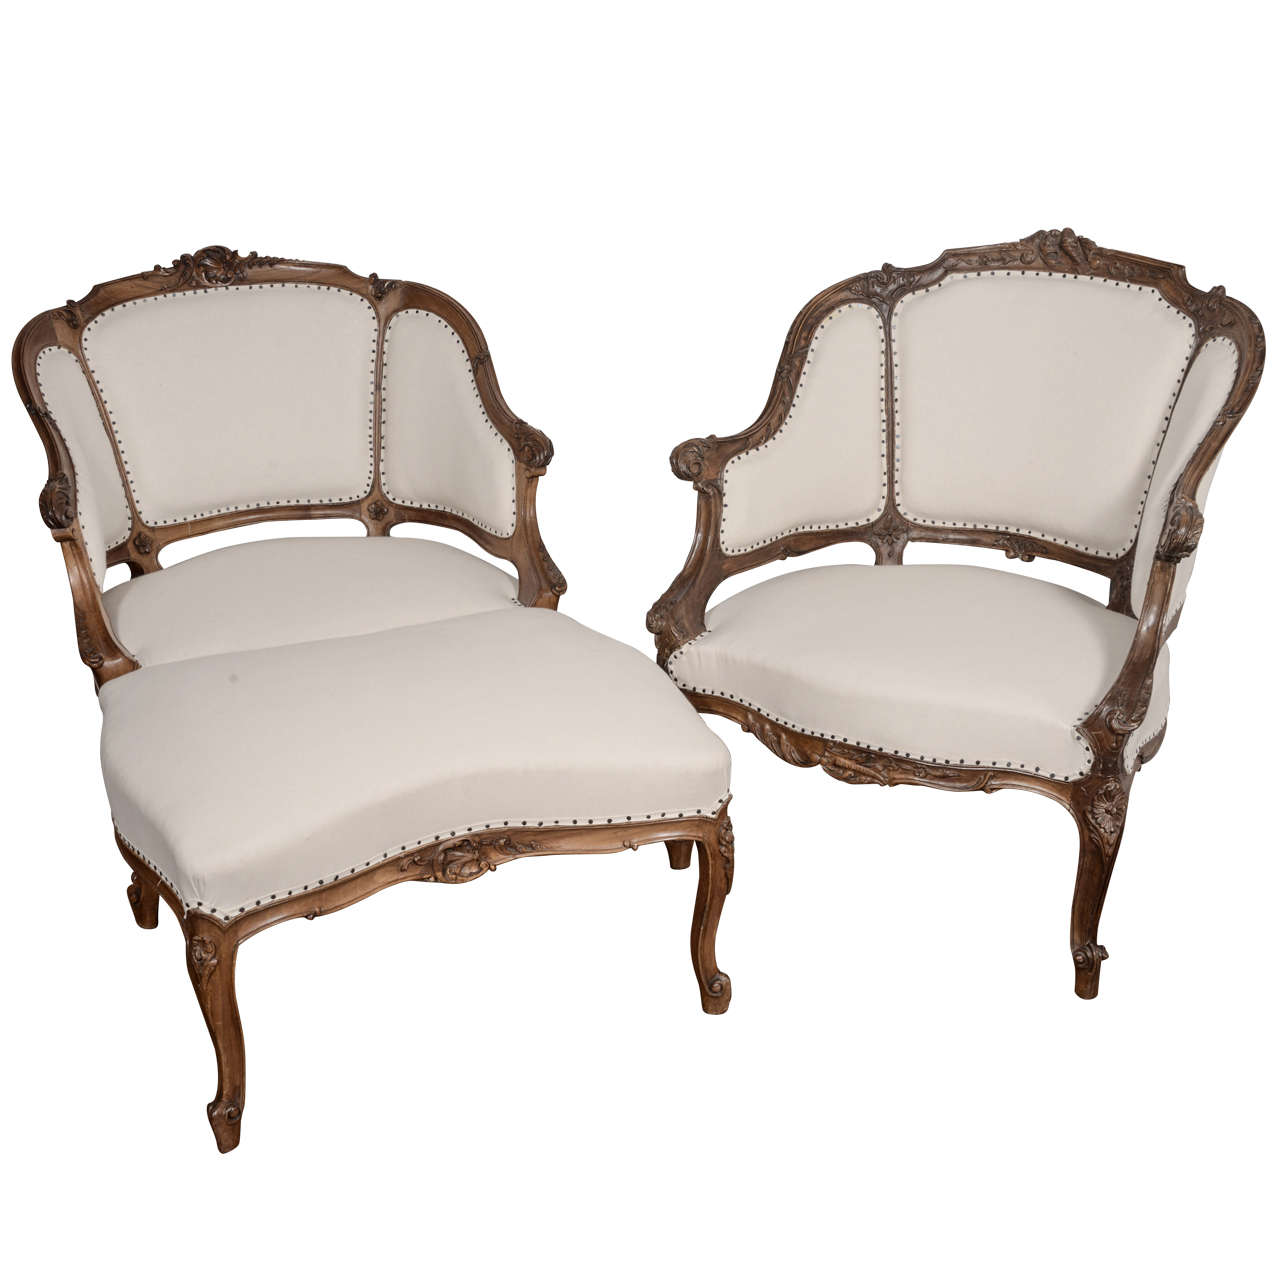 19th c. French "Duchesse Brisee" Chairs and Ottoman For Sale